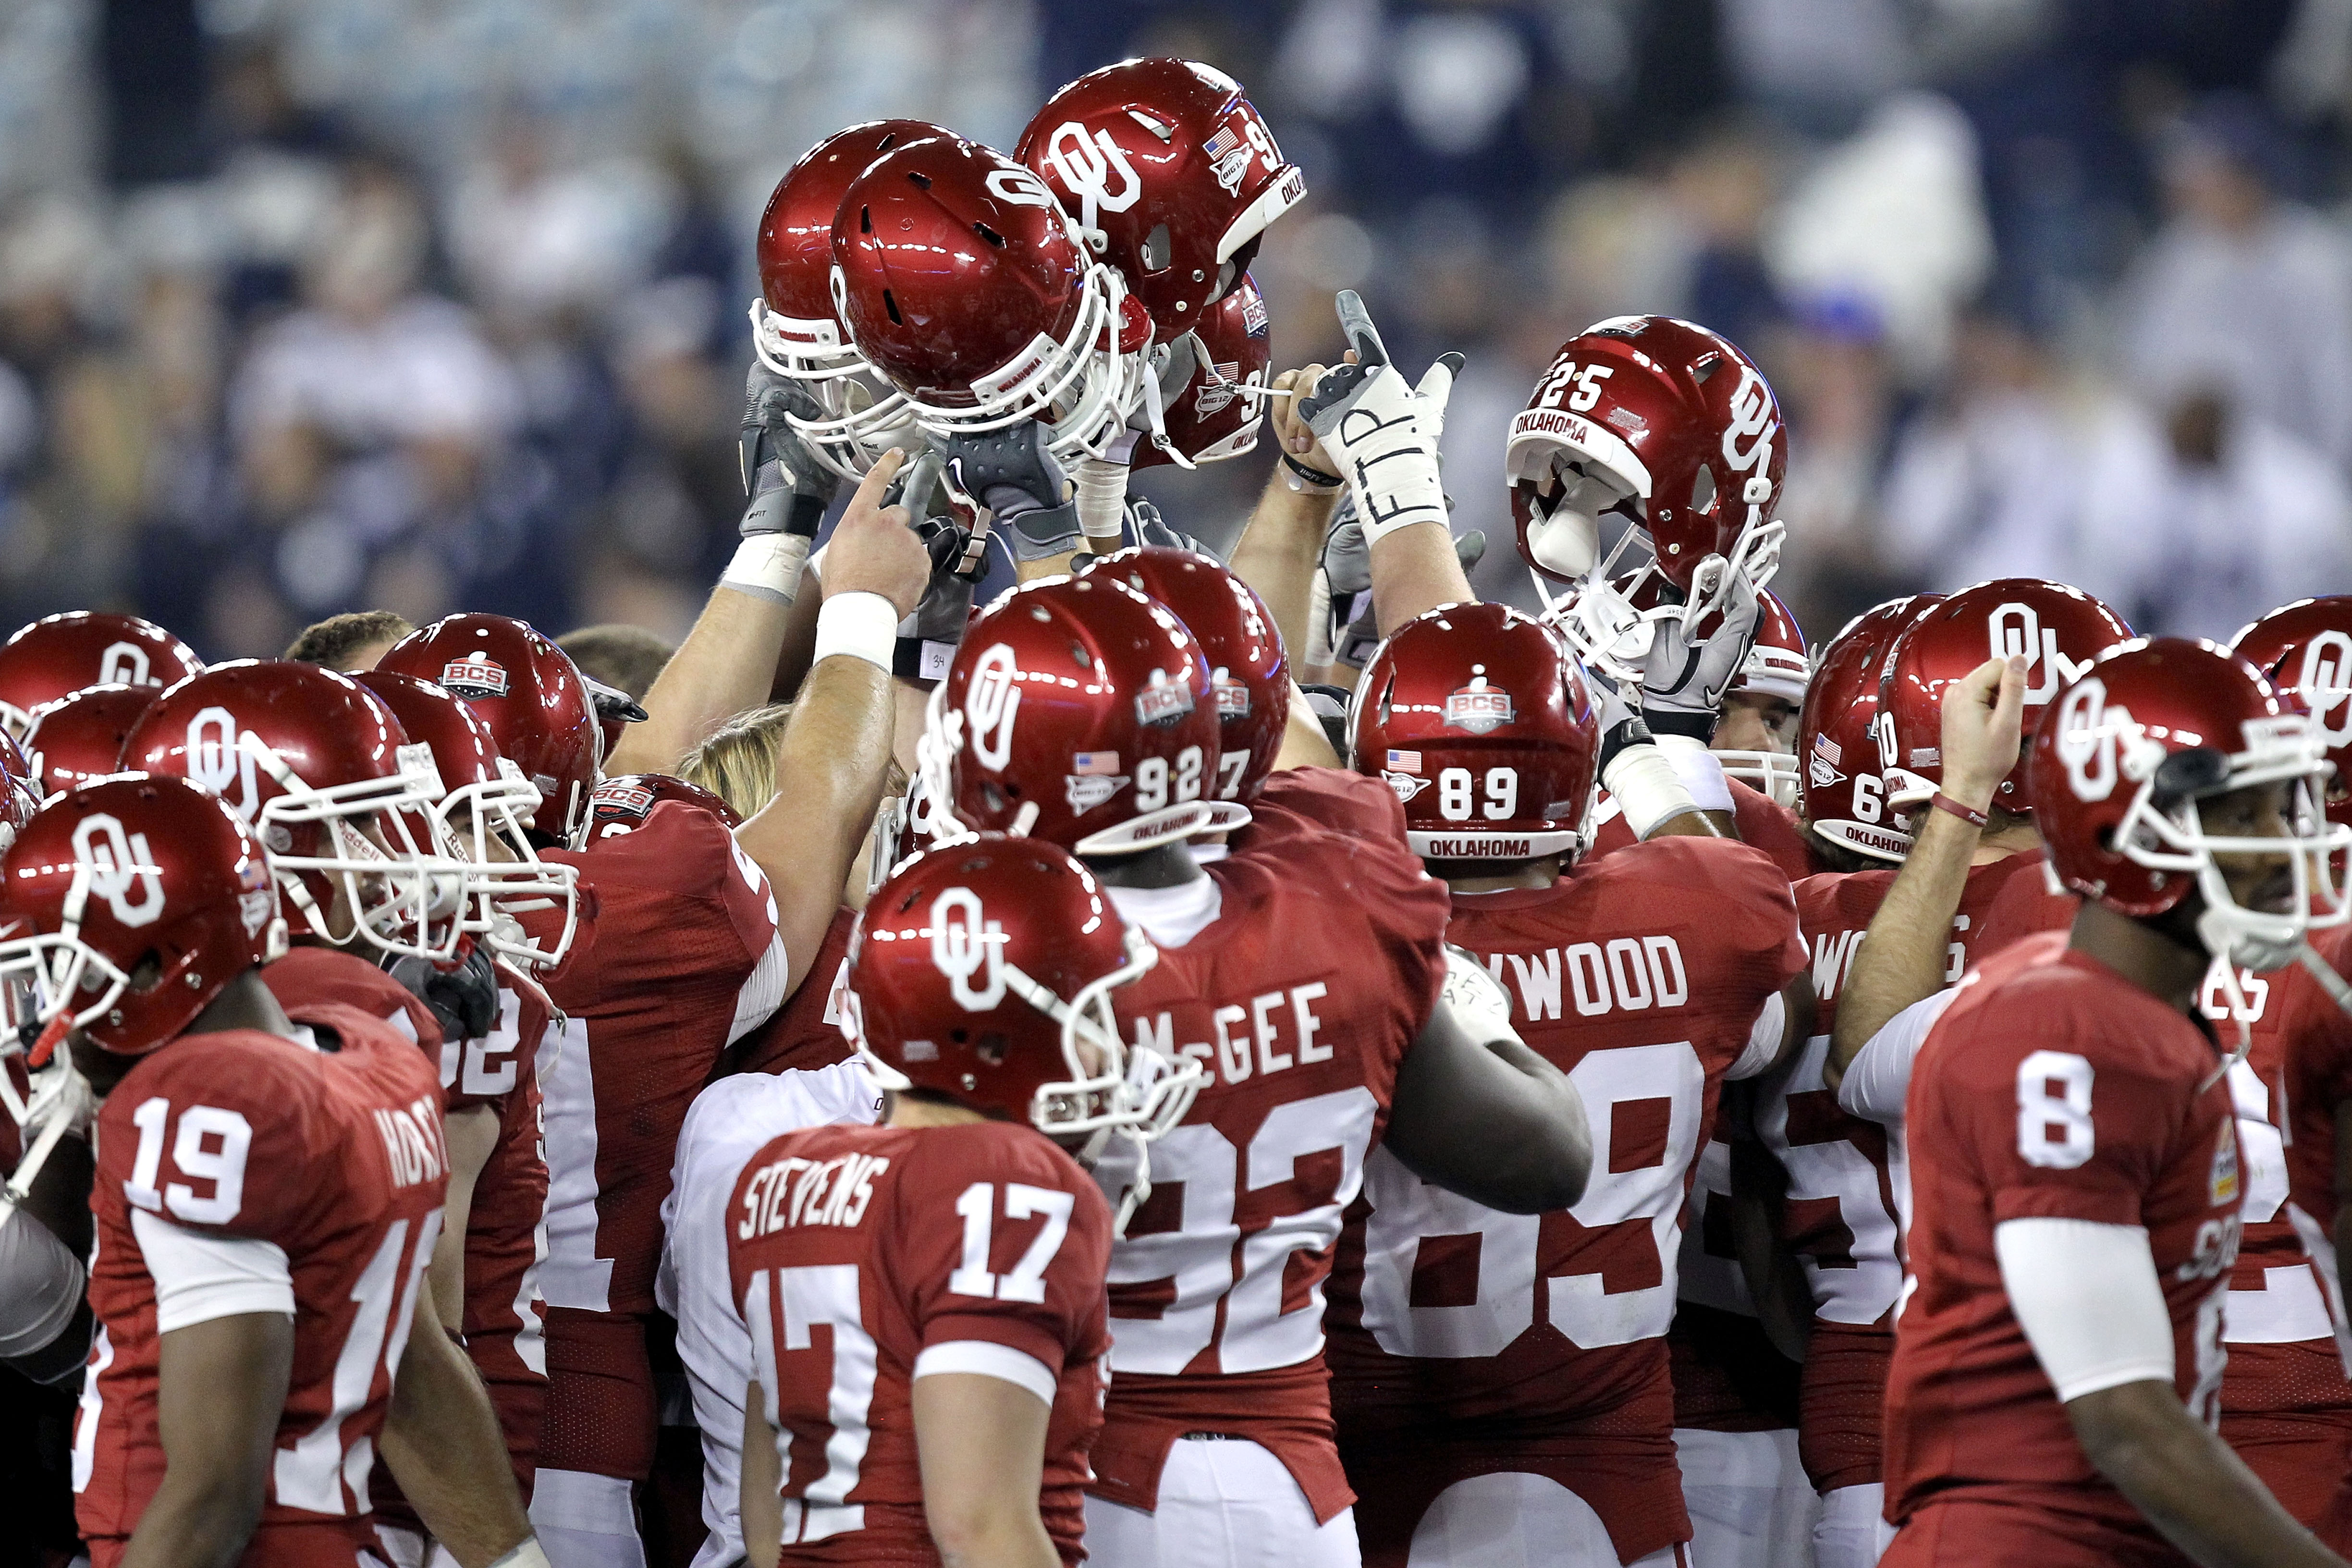 GLENDALE, AZ - JANUARY 01:  Oklahoma Sooners huddle before taking on the Connecticut Huskies in the Tostitos Fiesta Bowl at the Universtity of Phoenix Stadium on January 1, 2011 in Glendale, Arizona.  (Photo by Ronald Martinez/Getty Images)